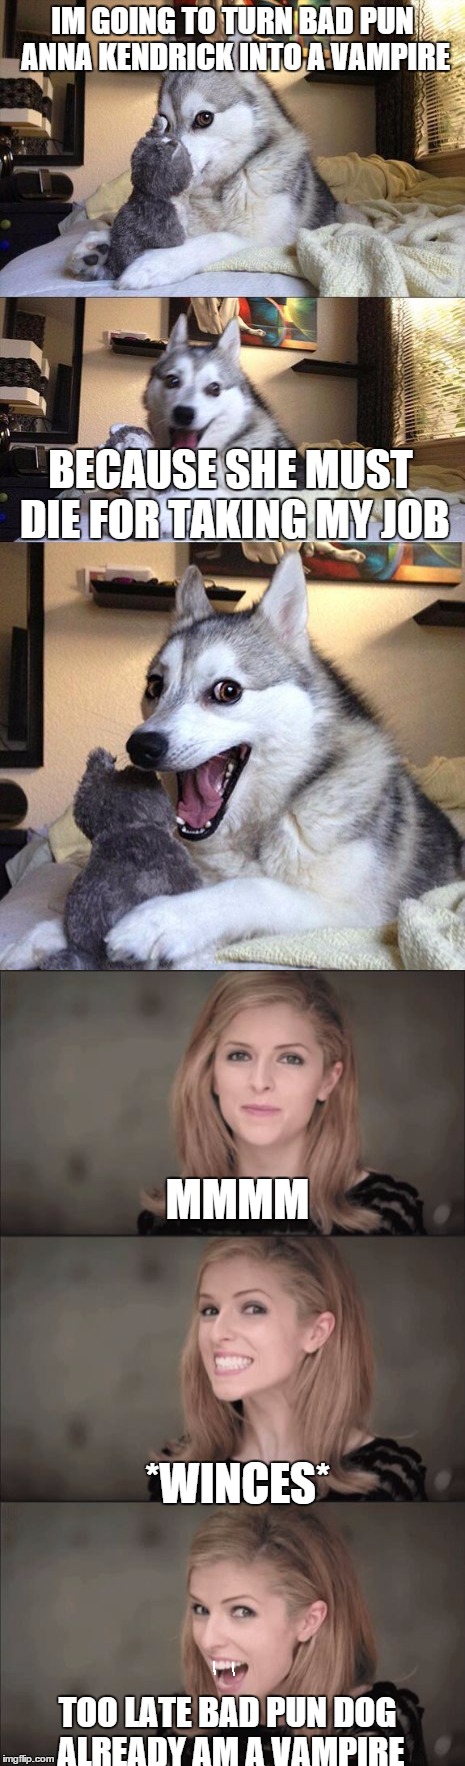 i mean no offense in any way | IM GOING TO TURN BAD PUN ANNA KENDRICK INTO A VAMPIRE; BECAUSE SHE MUST DIE FOR TAKING MY JOB; MMMM; *WINCES*; TOO LATE BAD PUN DOG ALREADY AM A VAMPIRE | image tagged in bad pun dog,bad pun anna kendrick | made w/ Imgflip meme maker